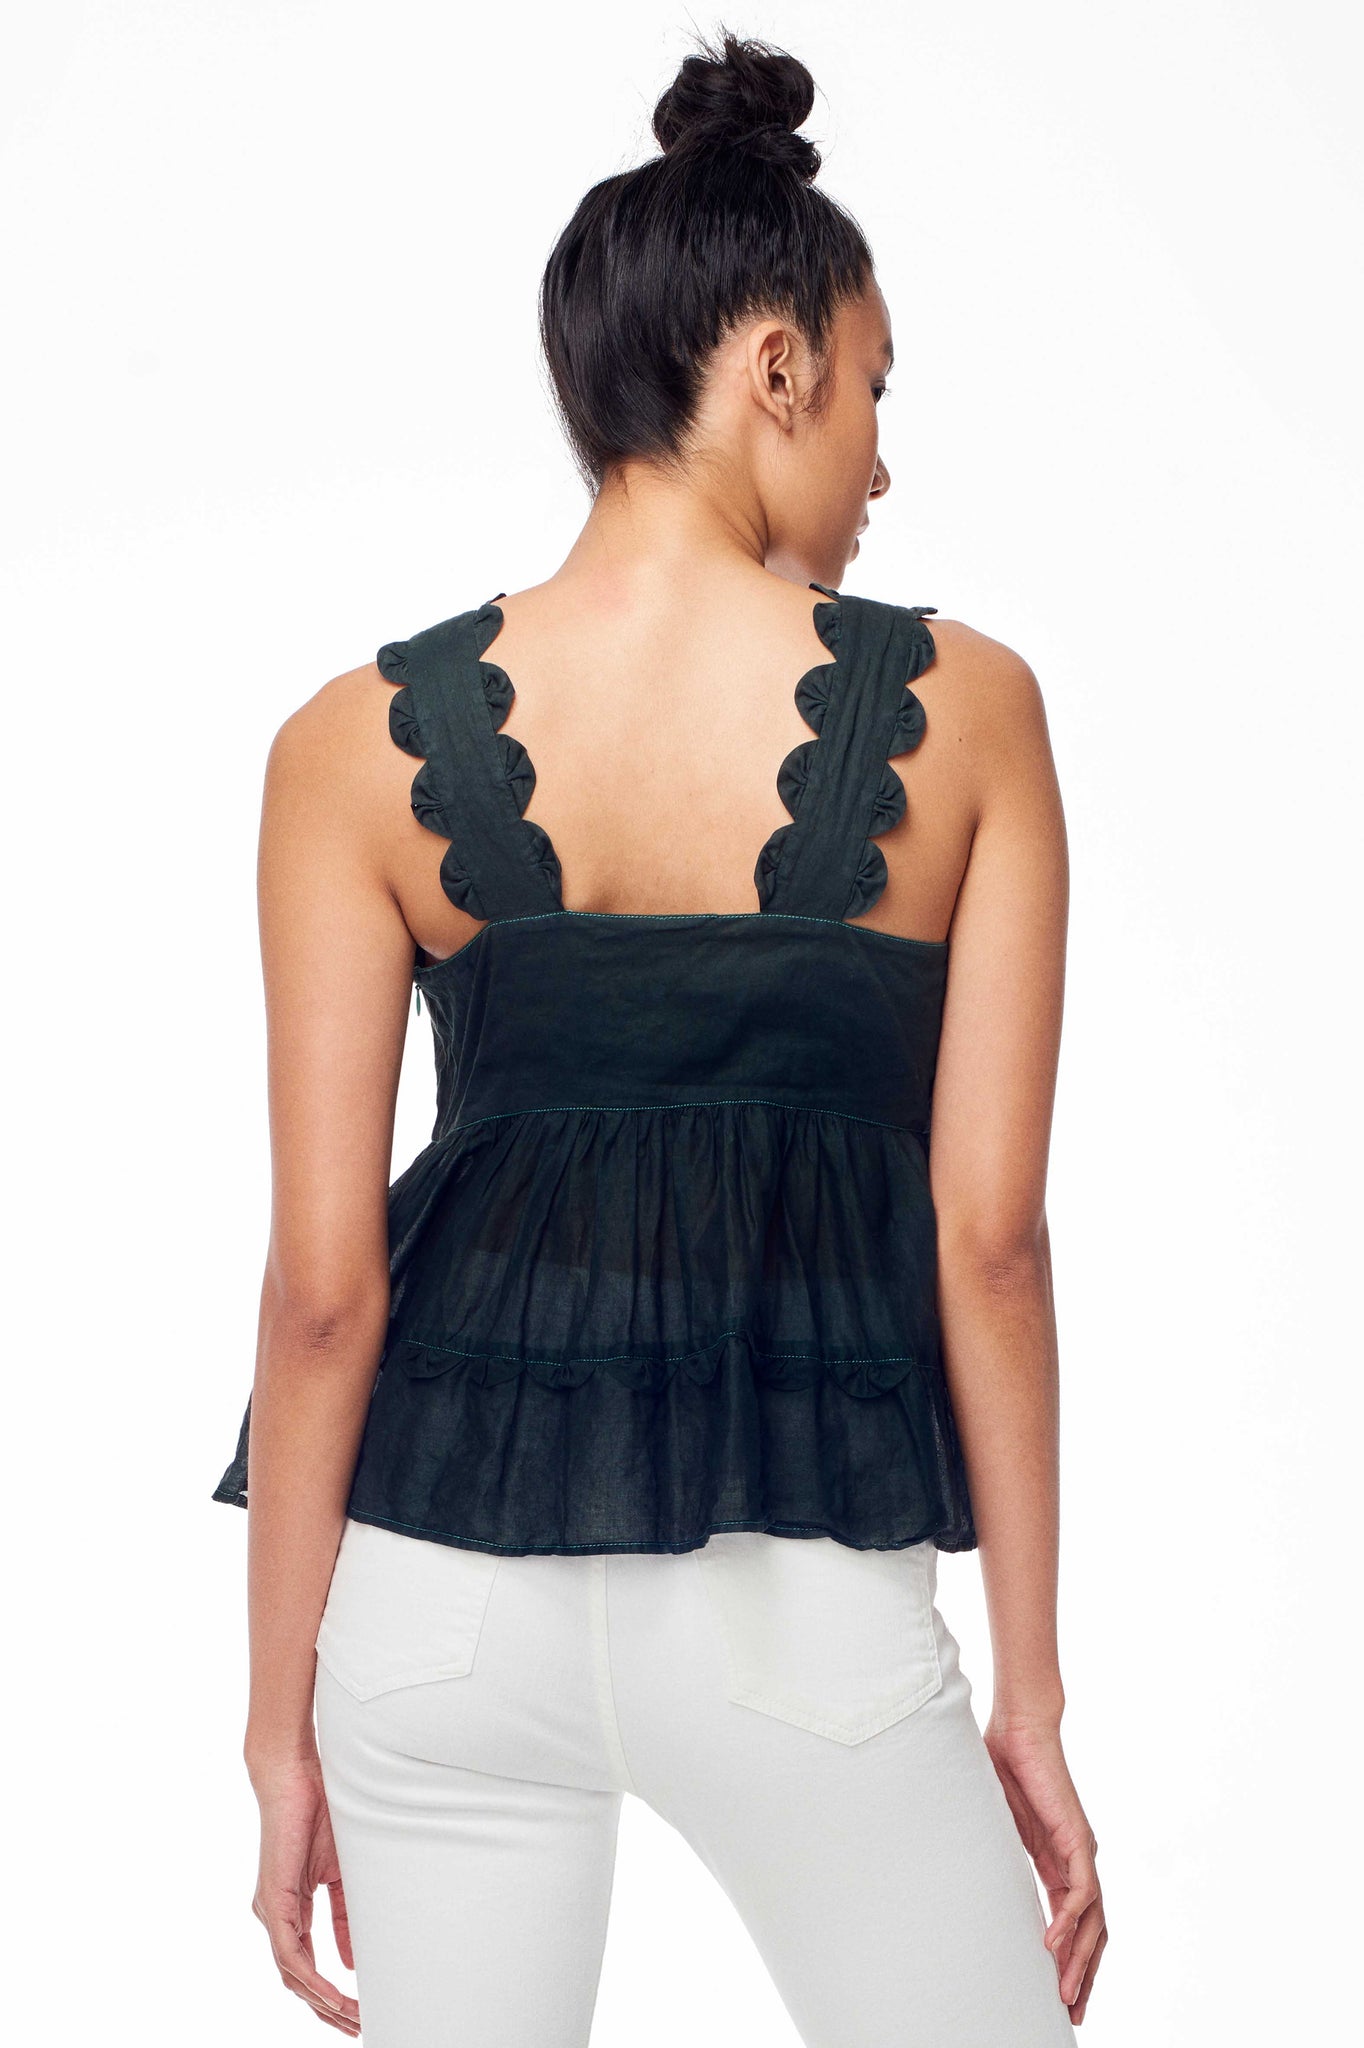 Antik Batik Spring 2018 Lolaa Top. Tank Top with scalloped strap detail and pleating detail. Fully lined at bust, semi-sheer at bottom. Small measures 24 inches from shoulder to hem. Color Black. 100% Cotton Organdi. Sizes X-Small Small Medium Large